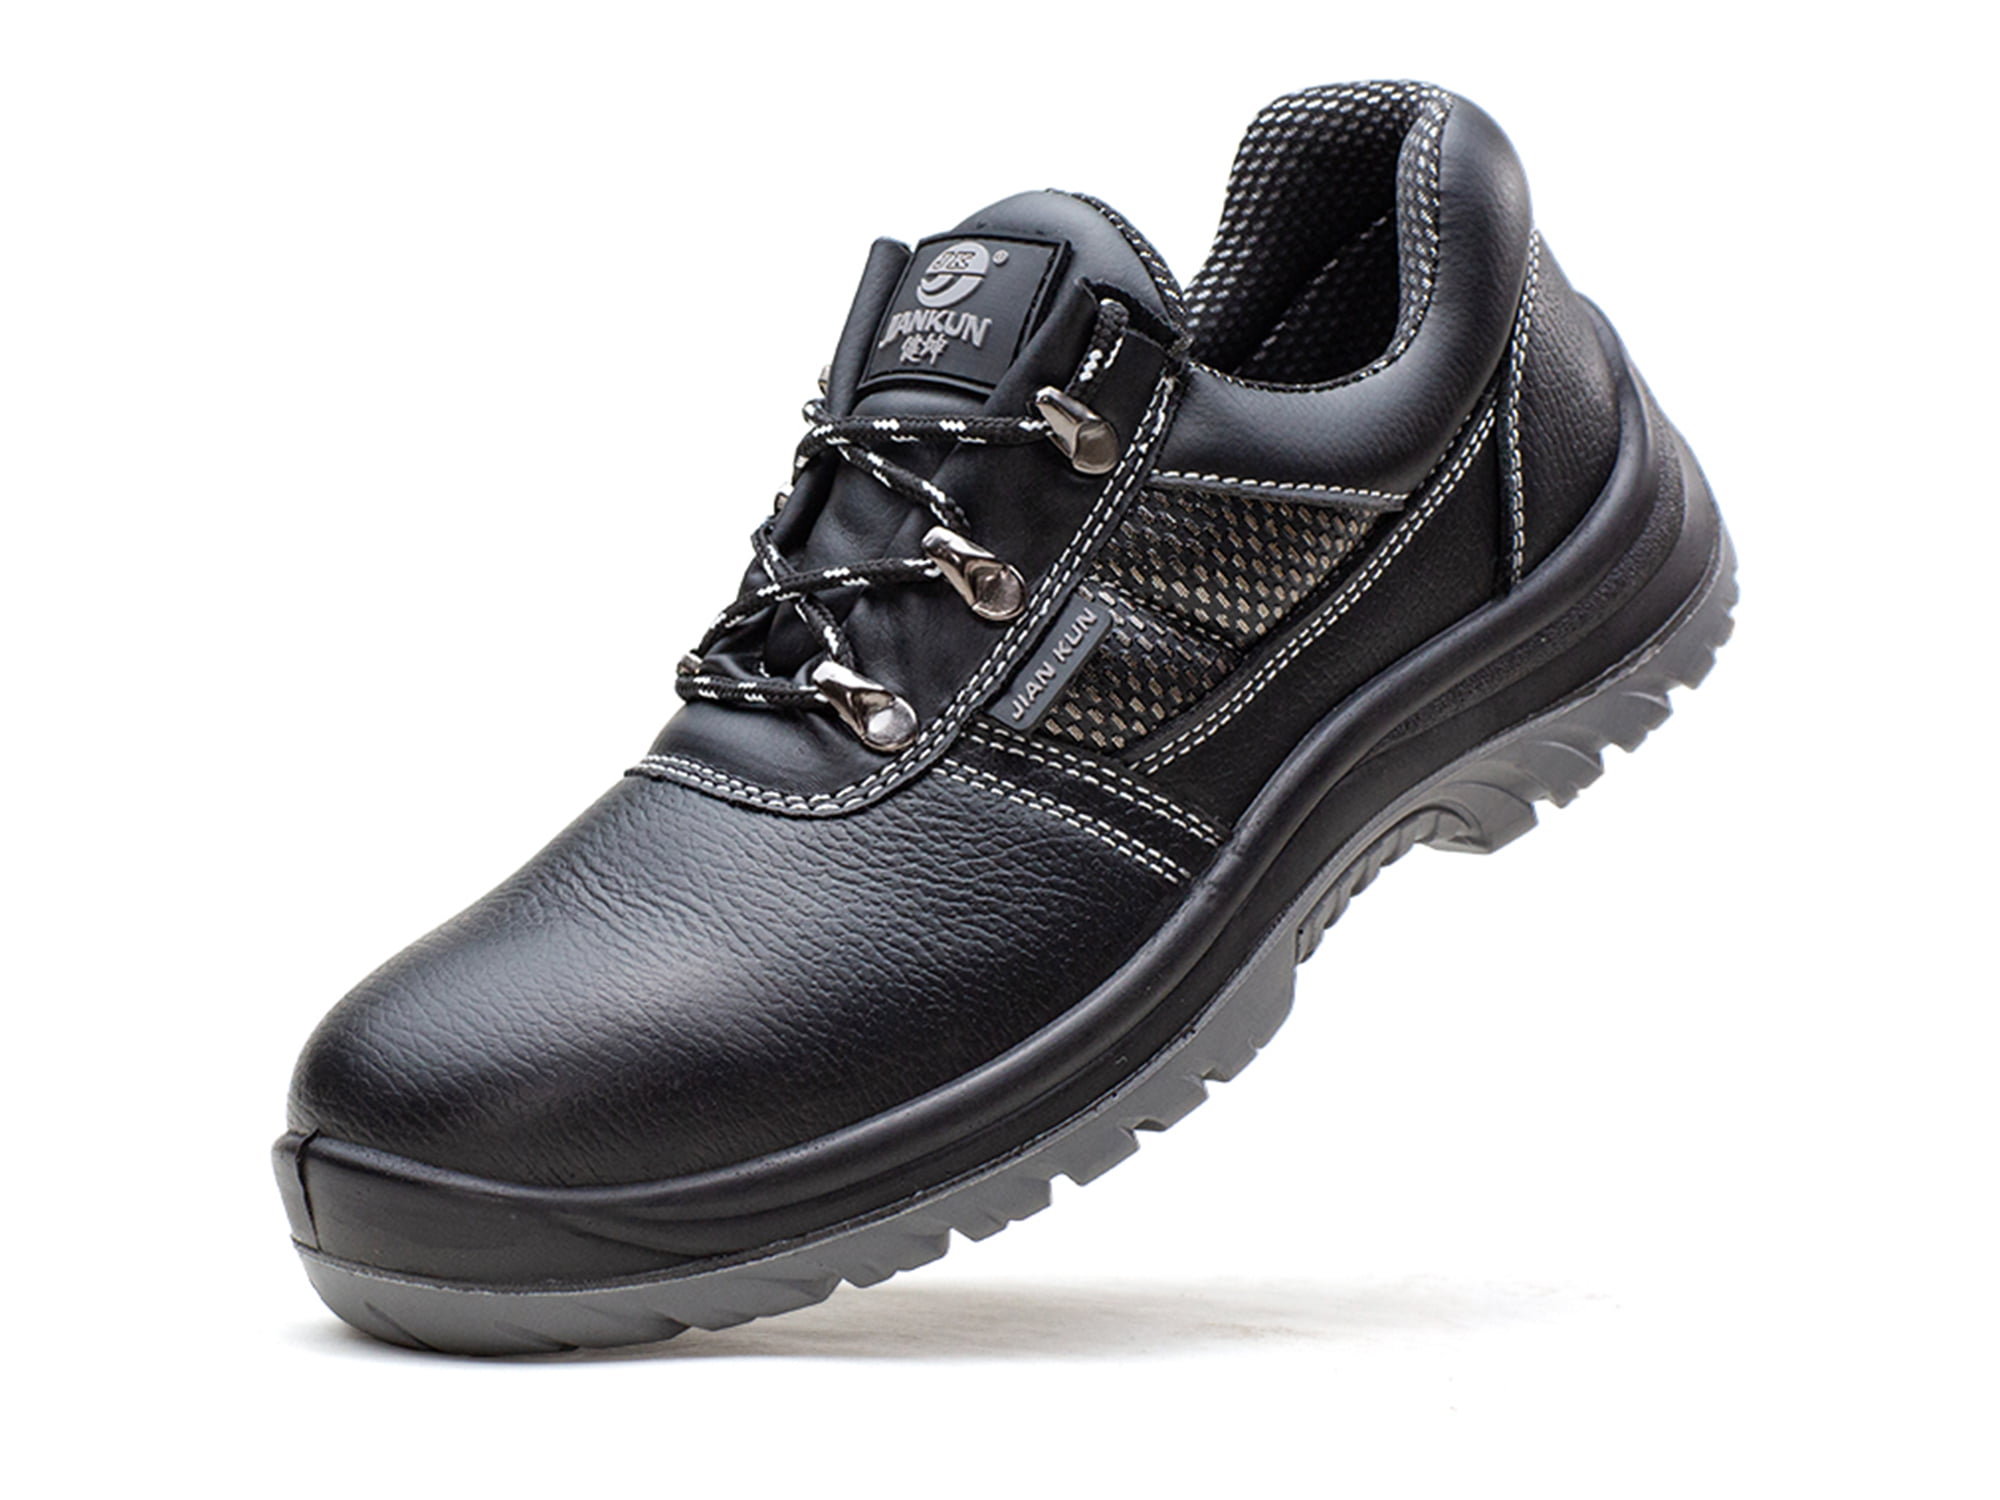 Details about   Men's Work Labor Safety Shoes Steel Toe Boots Indestructible Sneakers Sizes USA 